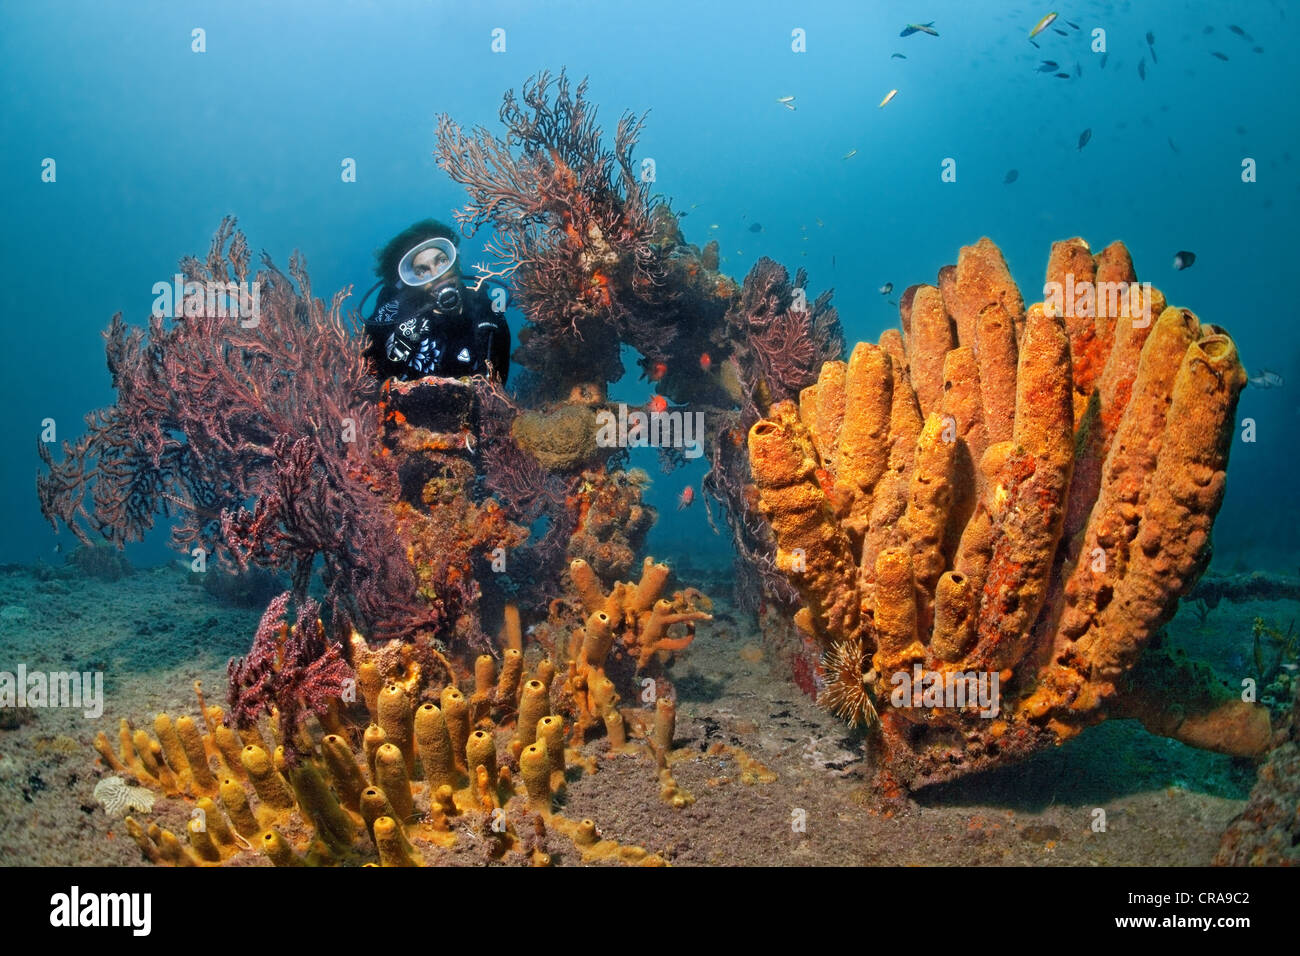 Diver on the deck of the wreck 'Lesleen M' that his encrusted with corals and sponges, St. Lucia, Windward Islands Stock Photo